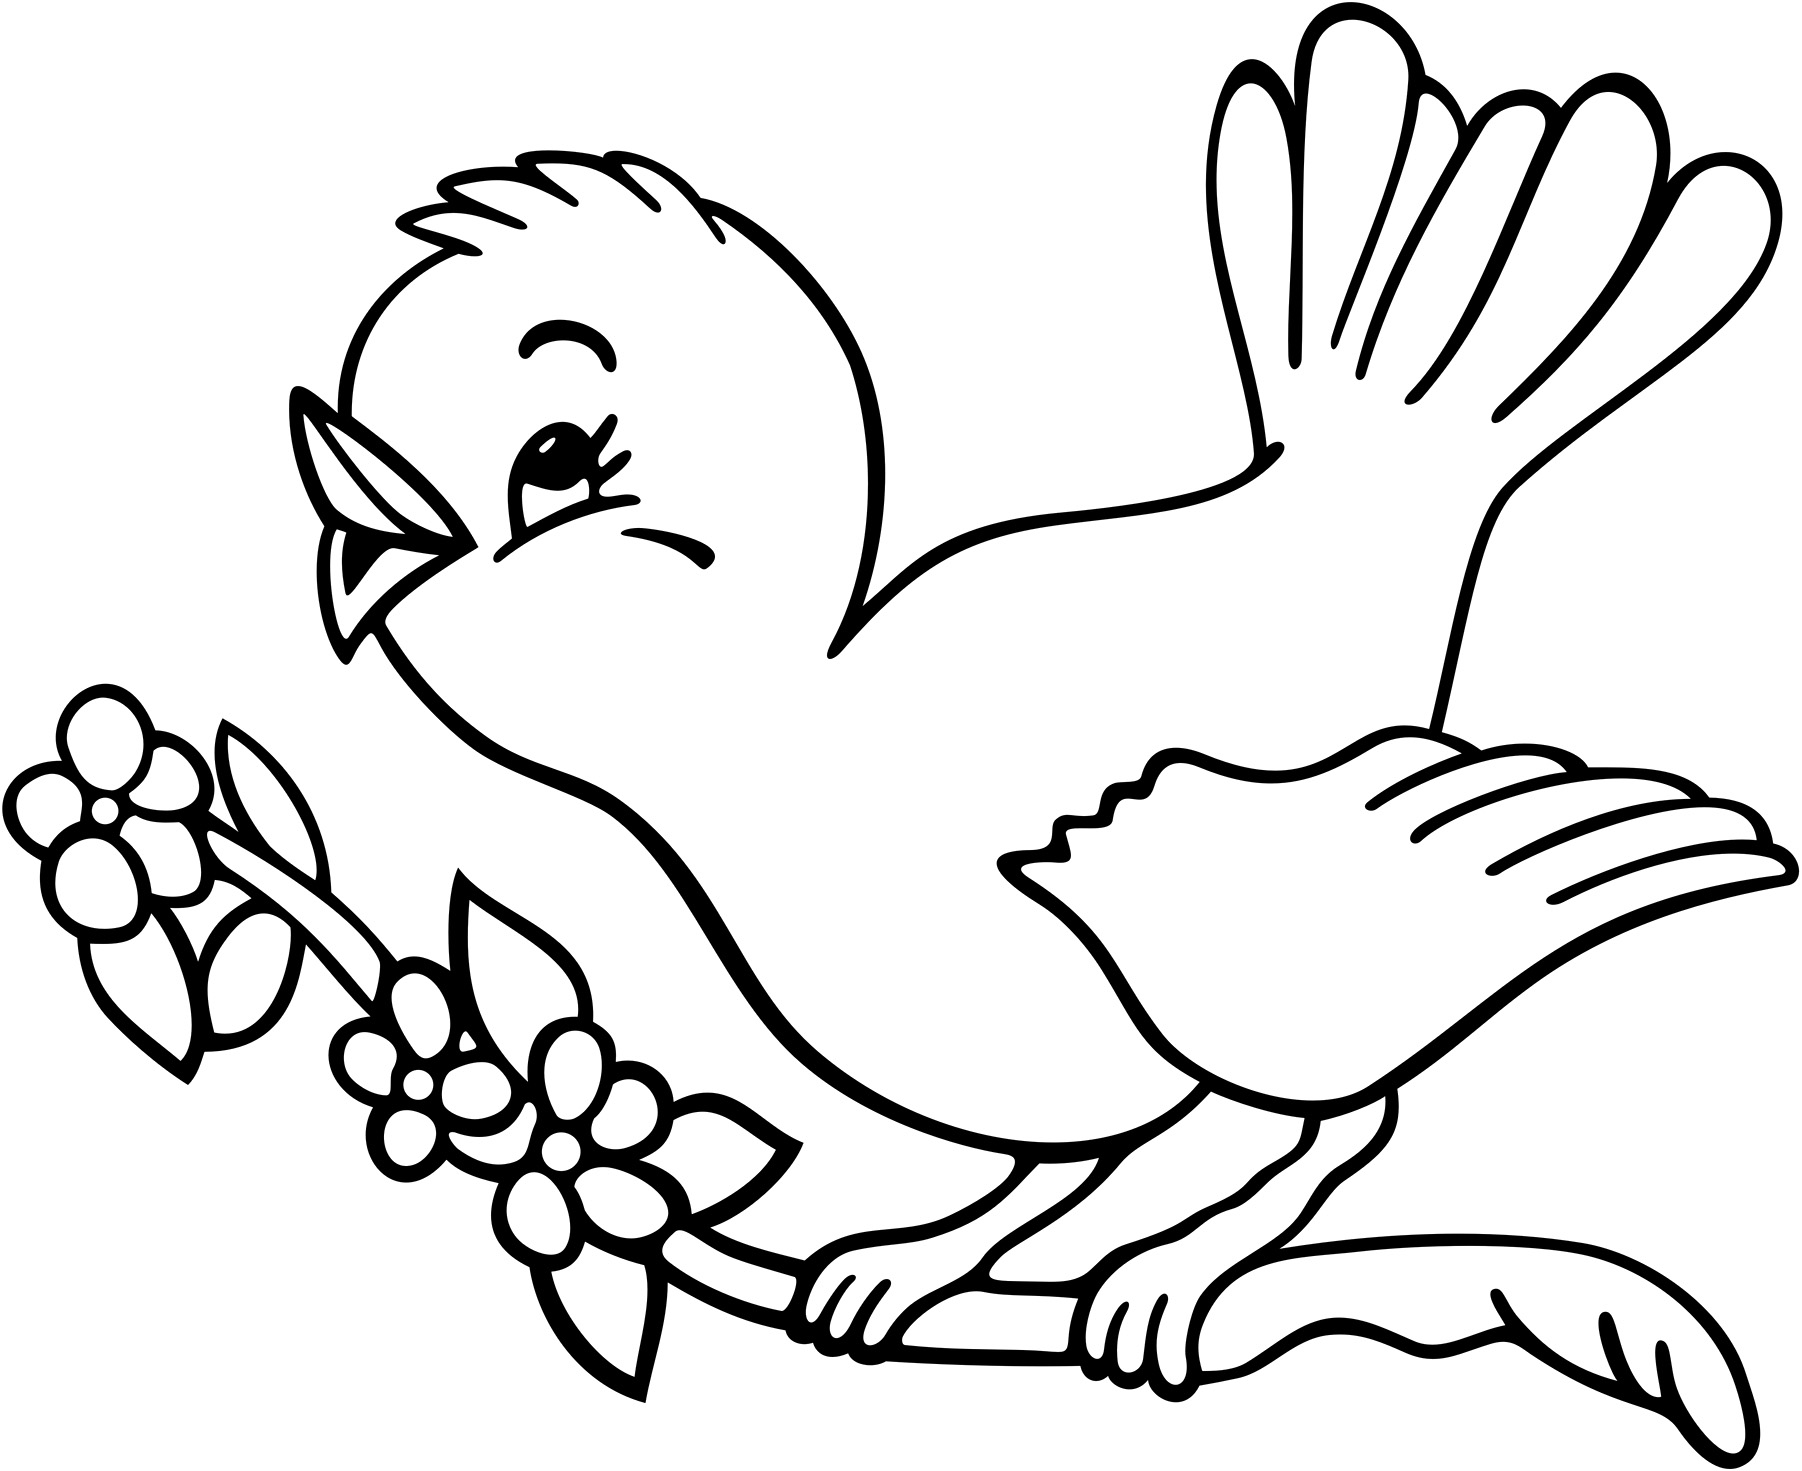 Free Coloring Cliparts, Download Free Clip Art, Free Clip Art on.